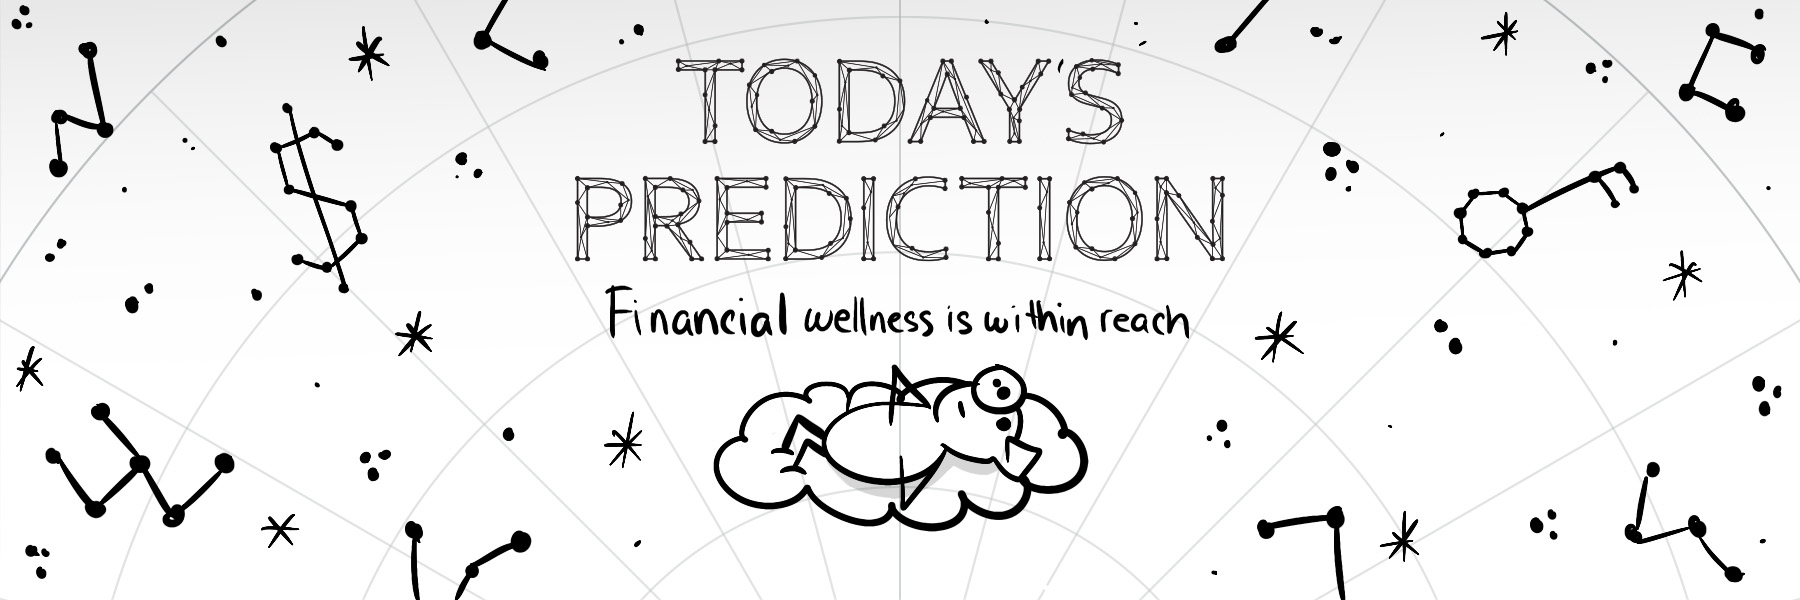 In the center of the image, a pig on a cloud, looking up to the words Today's Prediction: Financial wellness is within reach, surrounded by constellations and stars.